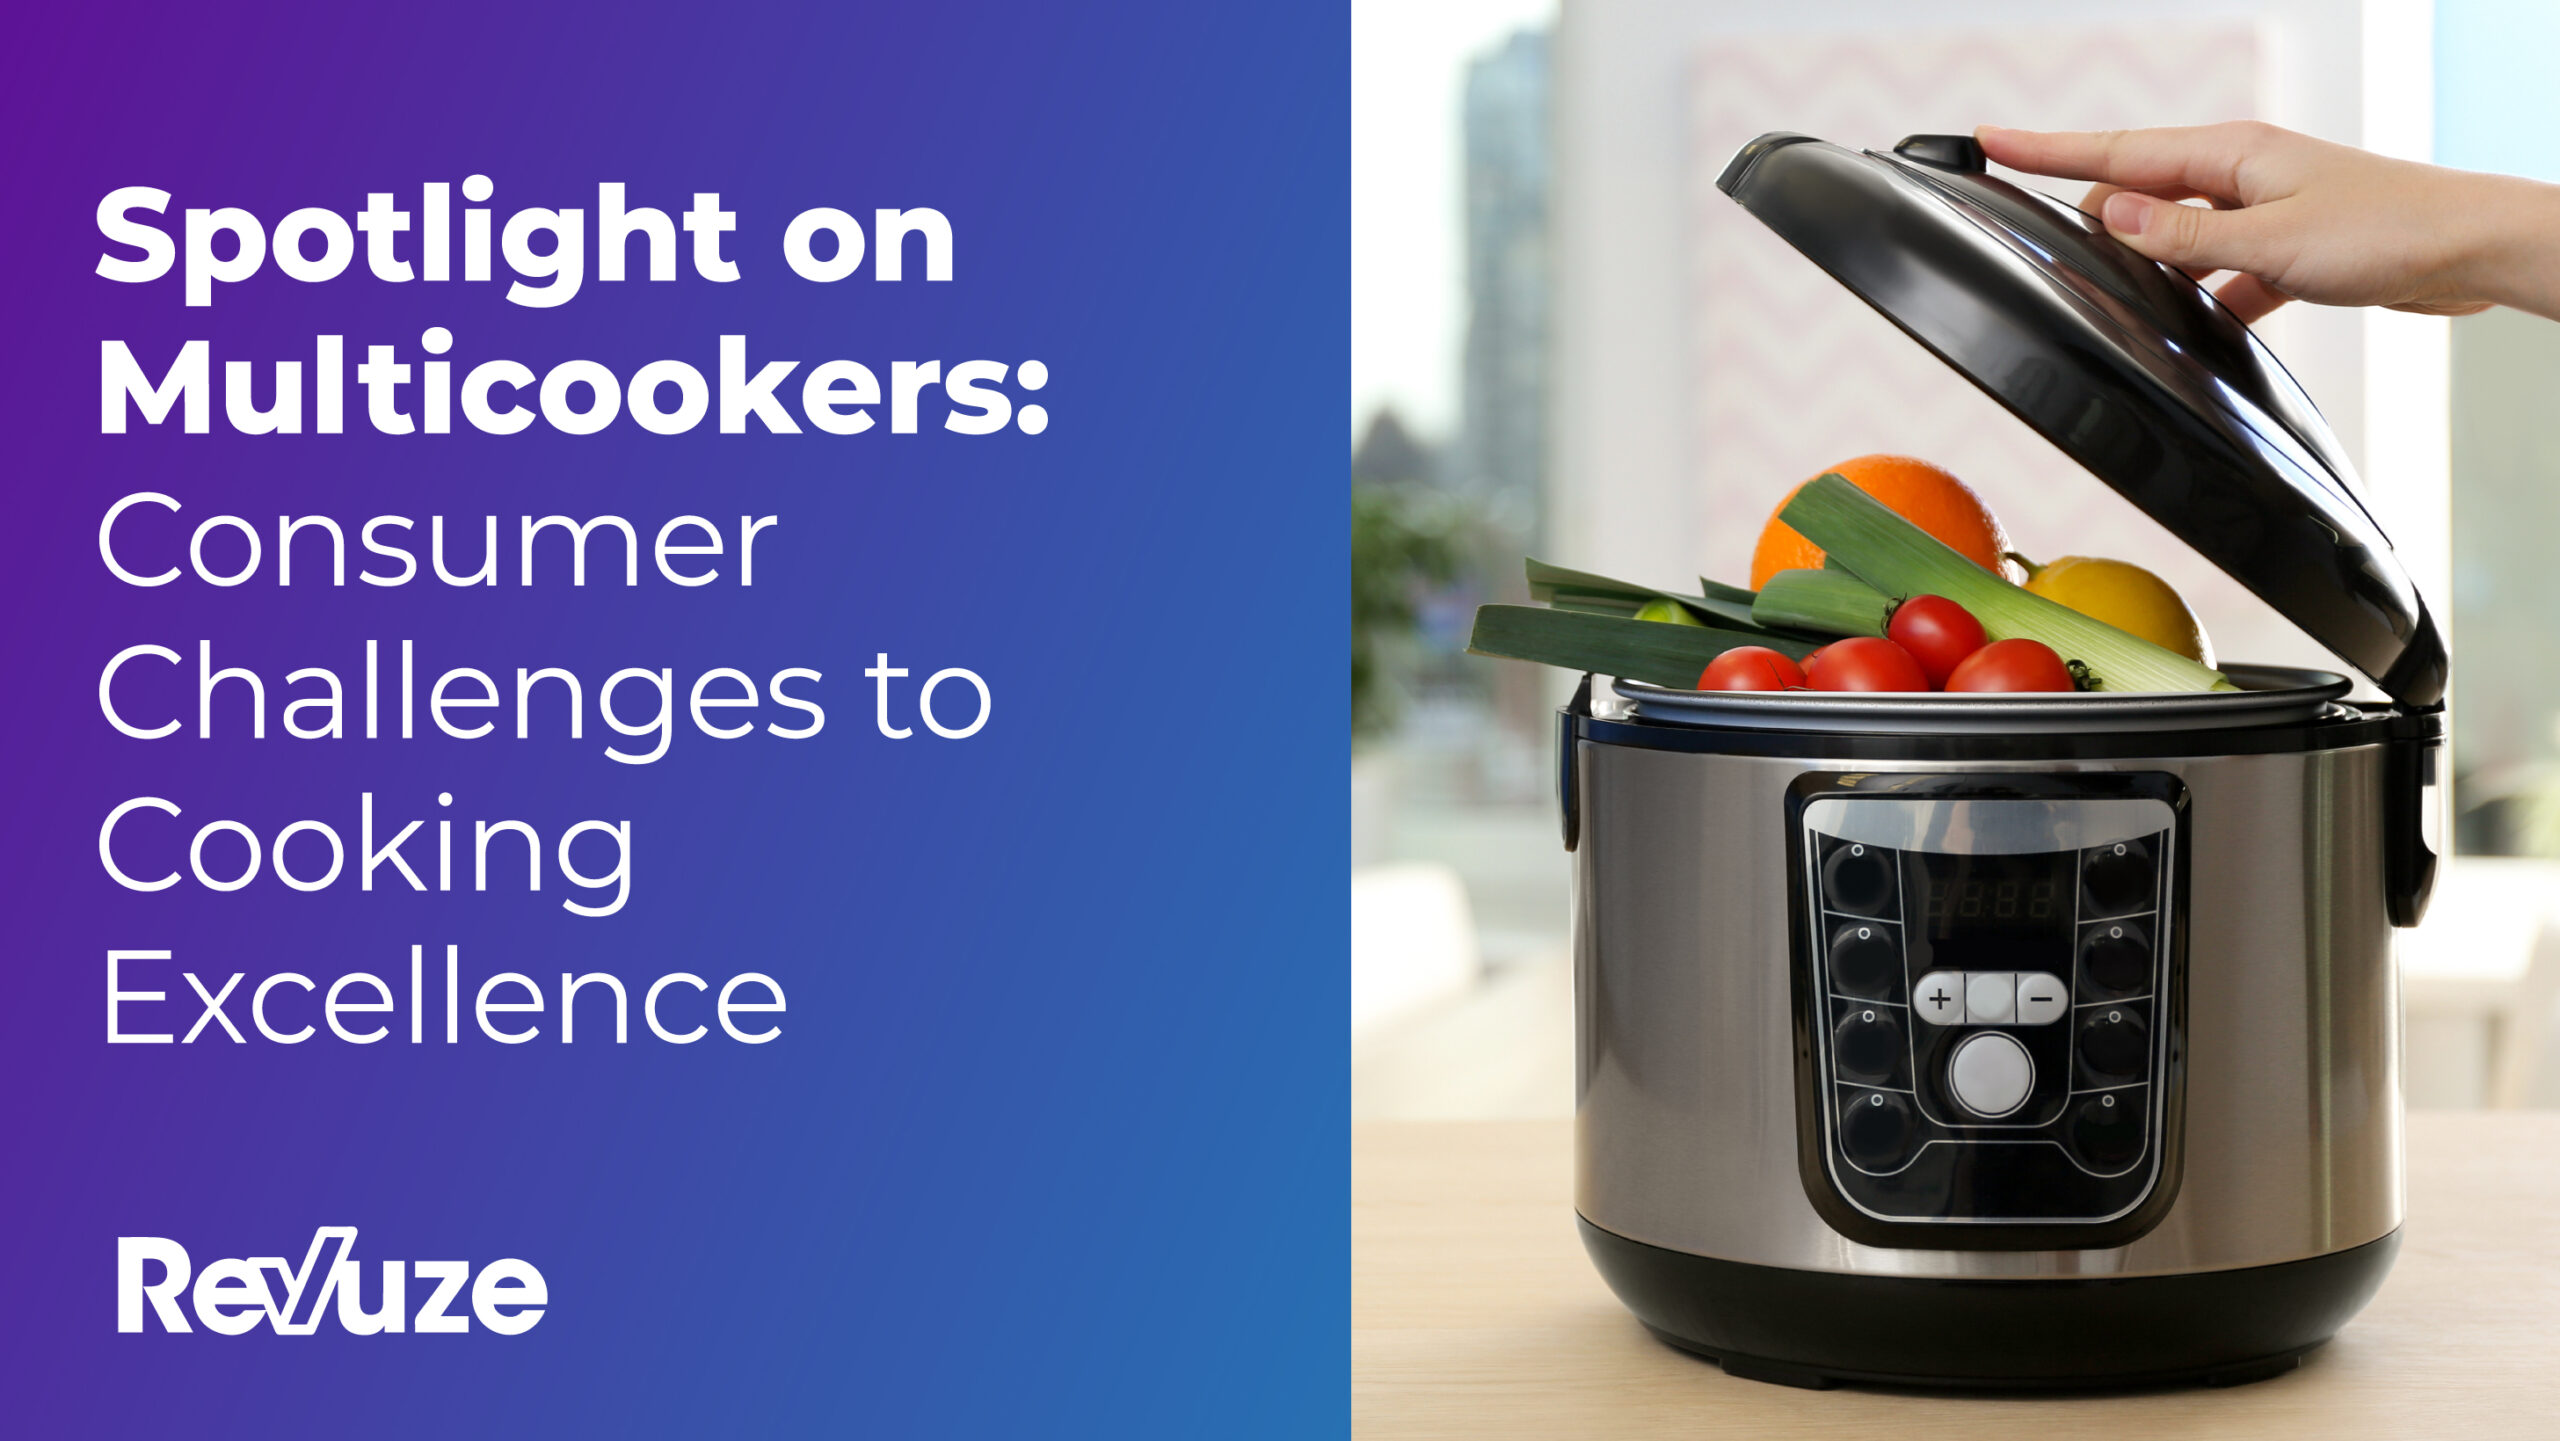 Spotlight on Multicookers: Consumer Challenges to Cooking Excellence